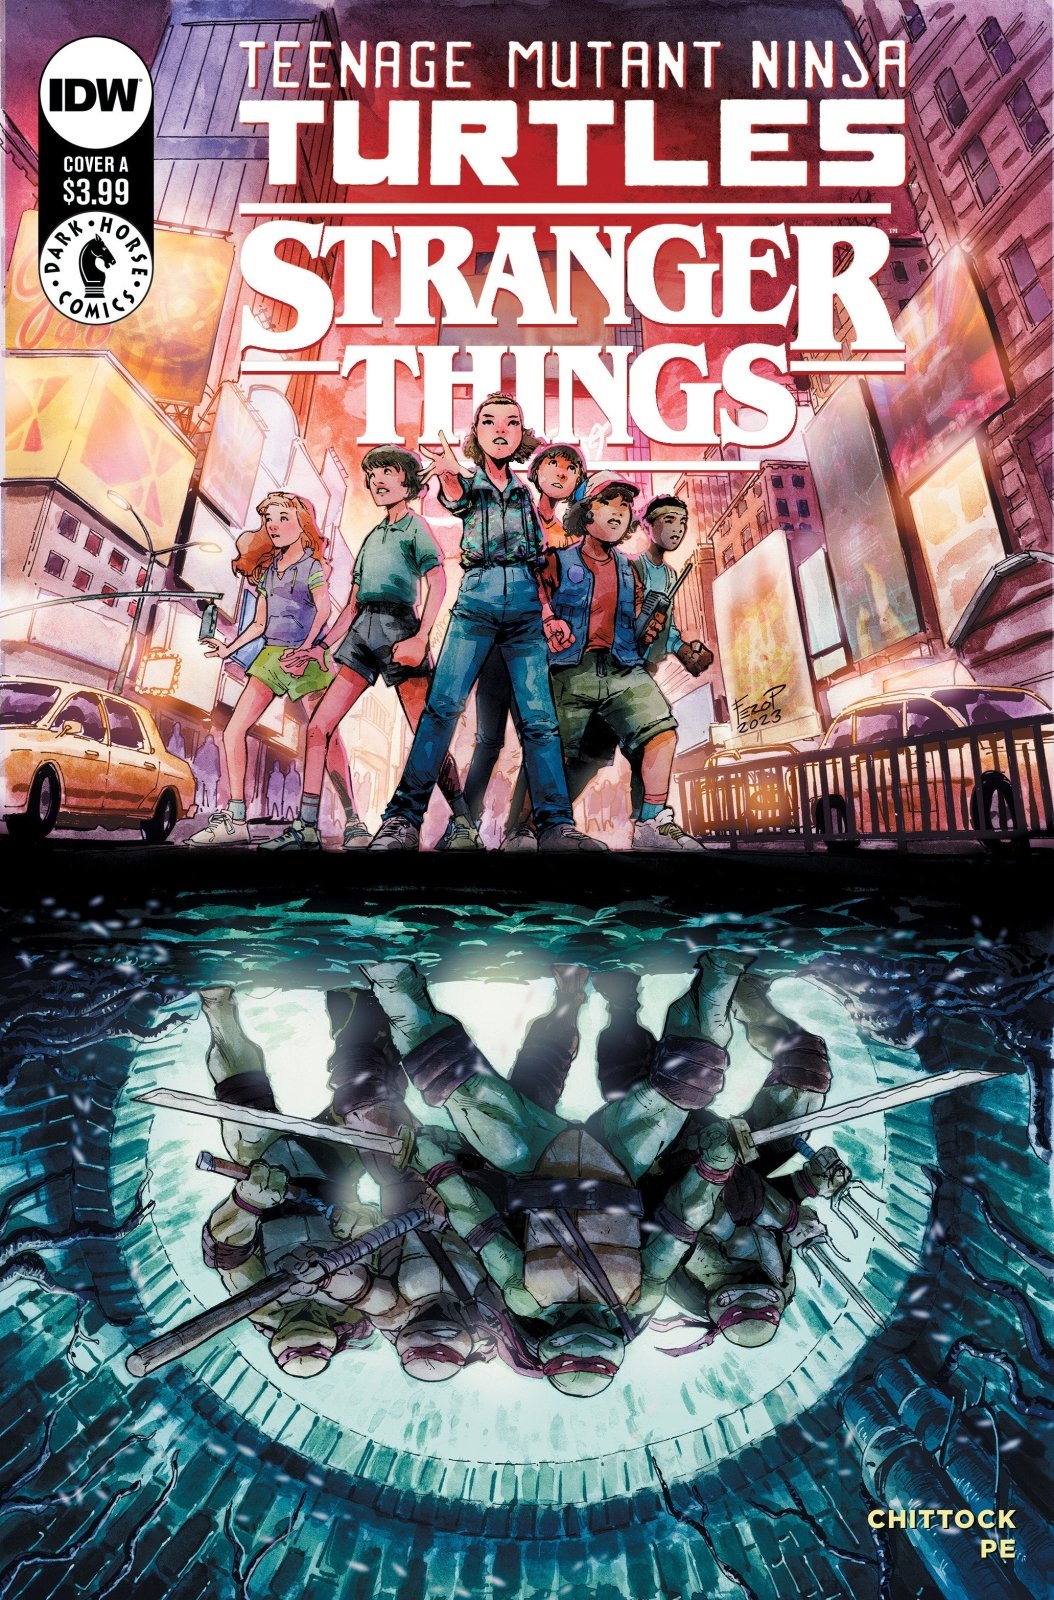 Teenage Mutant Ninja Turtles X Stranger Things #1 Cover A (Pe) - The Fourth Place